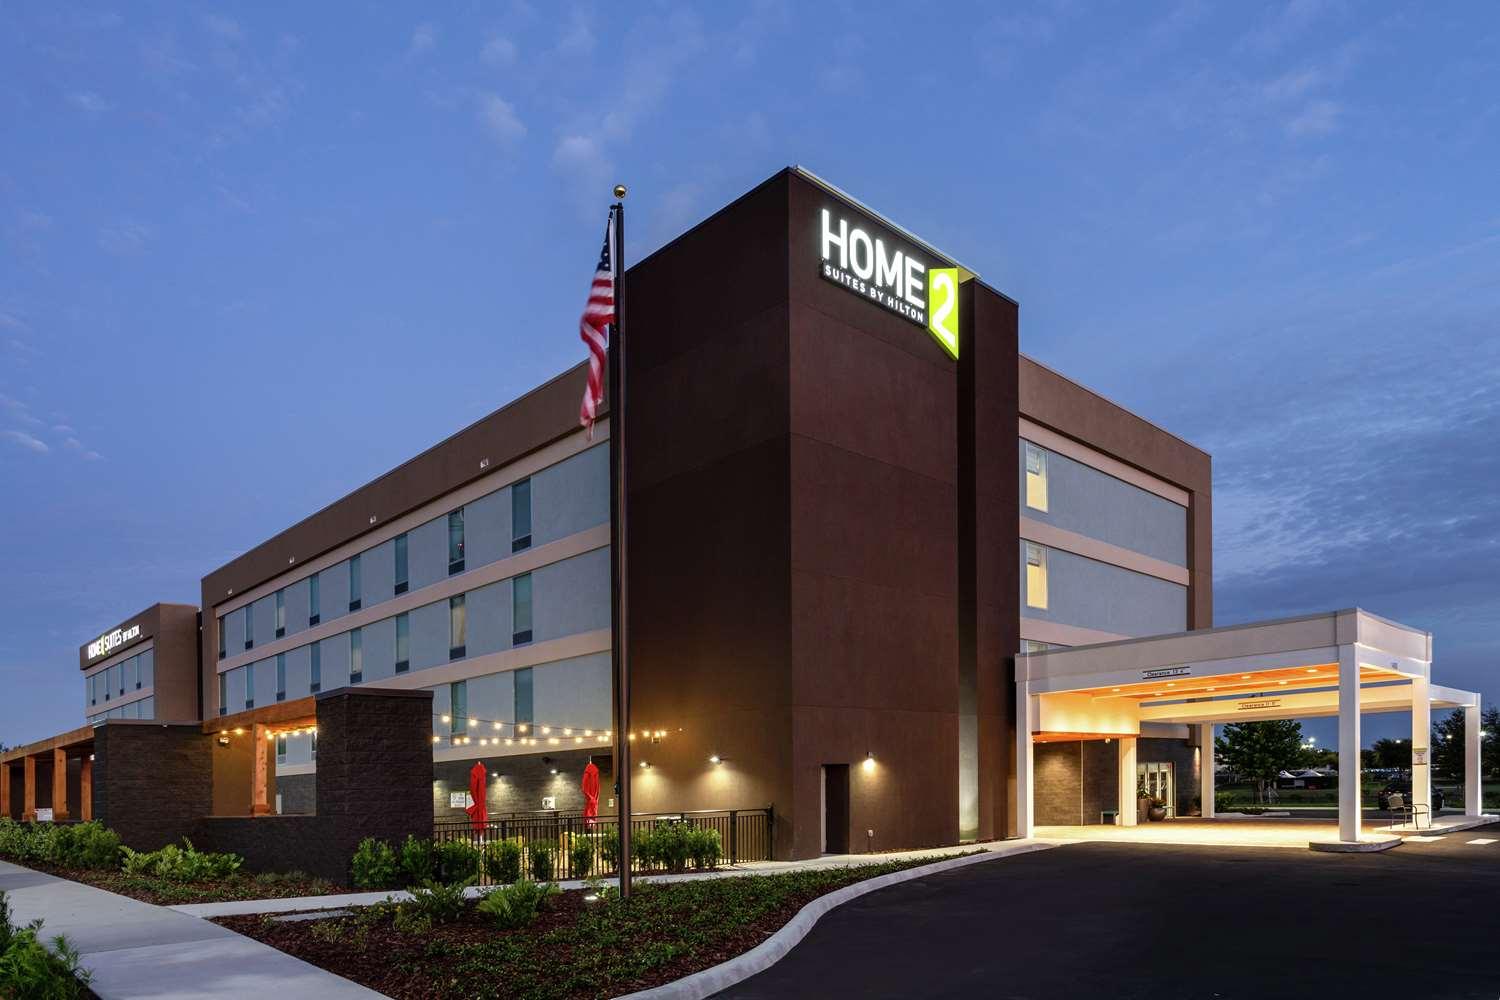 Home2 Suites by Hilton Clermont in Clermont, FL